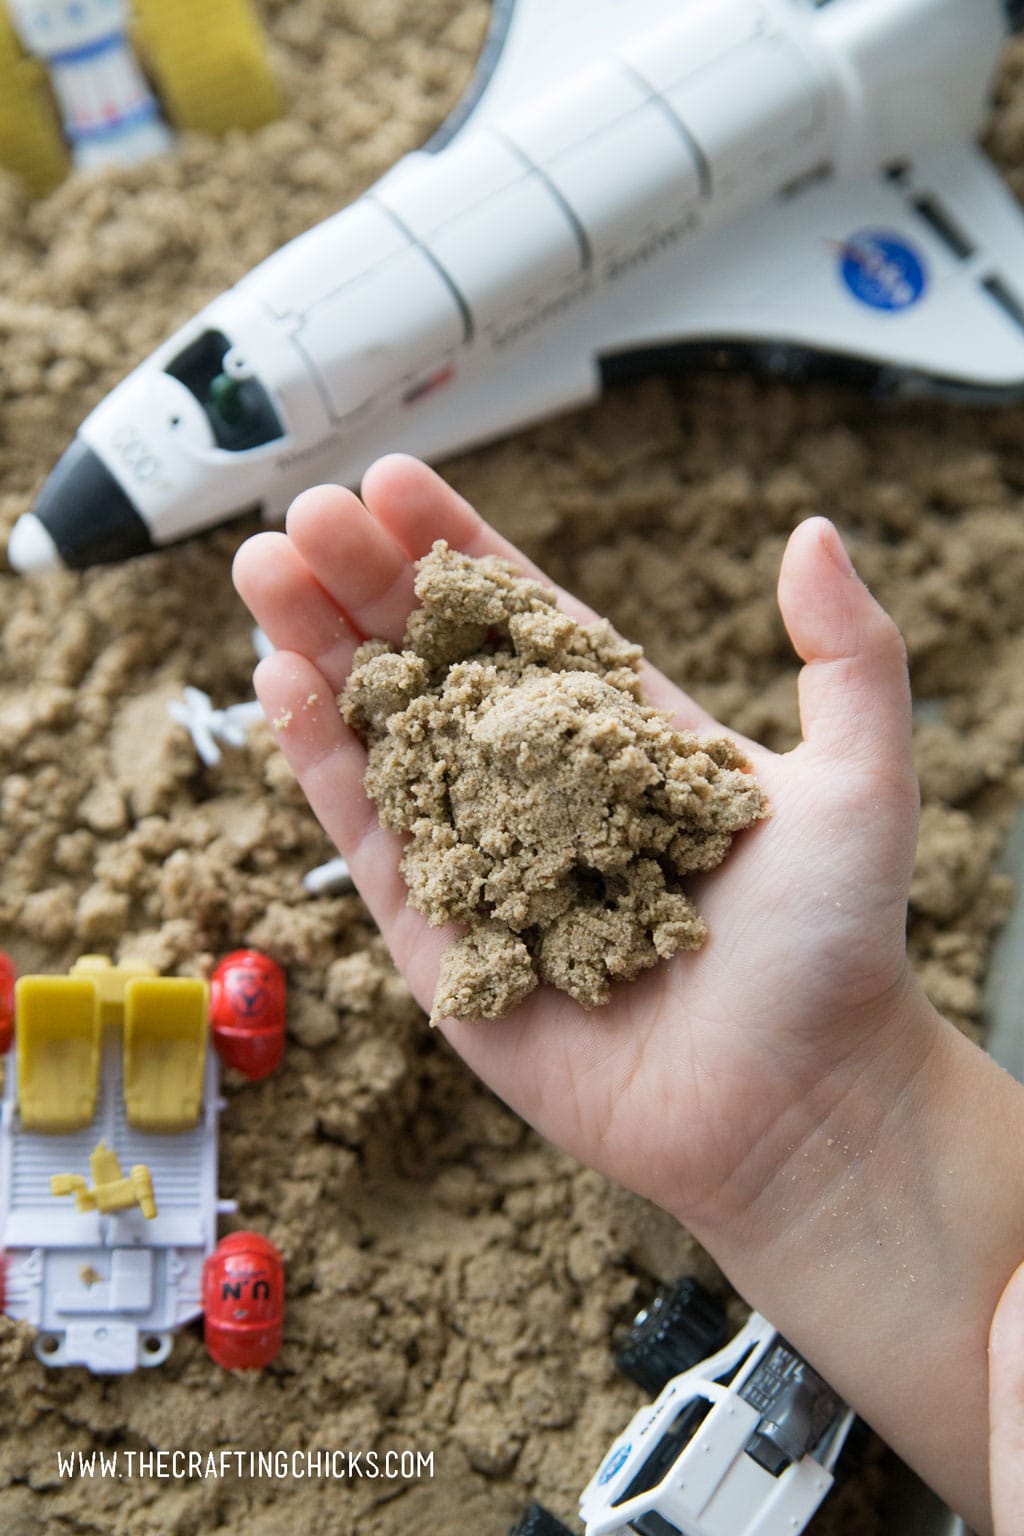 Moon sand or moldable sand it a hit with kids